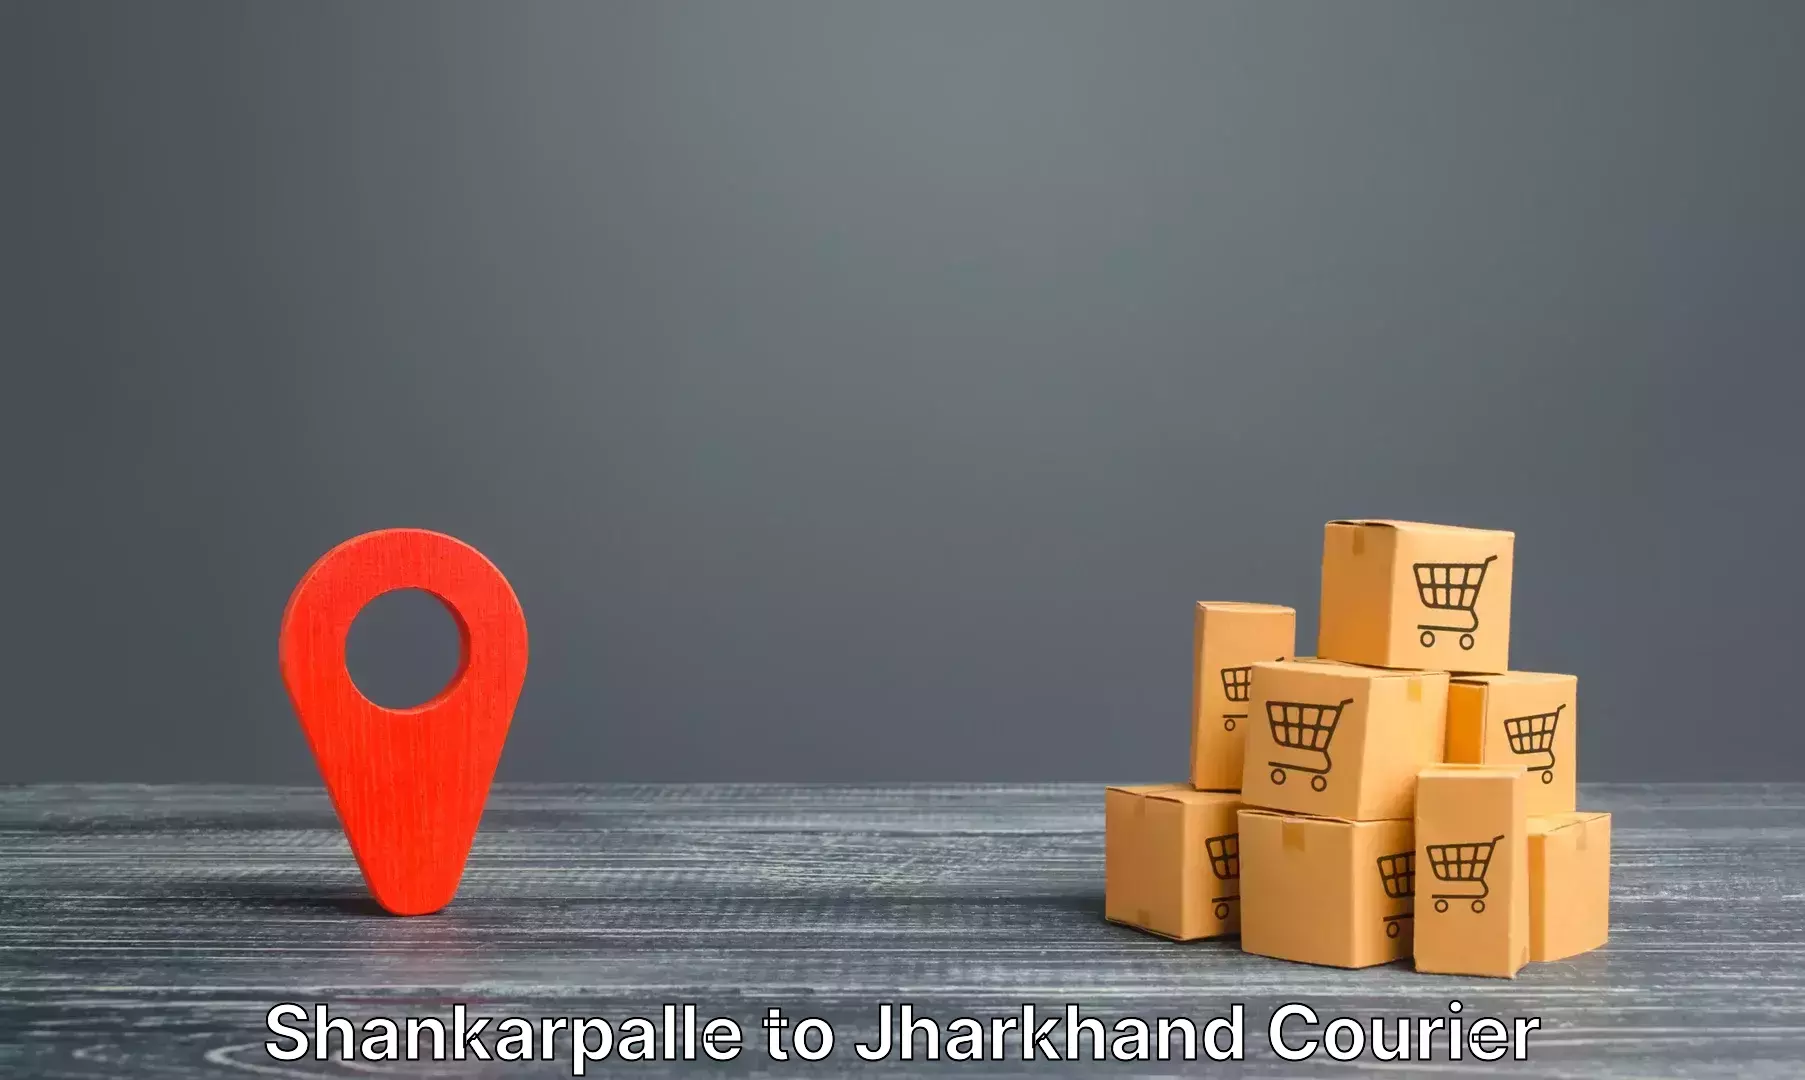 Luggage delivery system Shankarpalle to Jharkhand